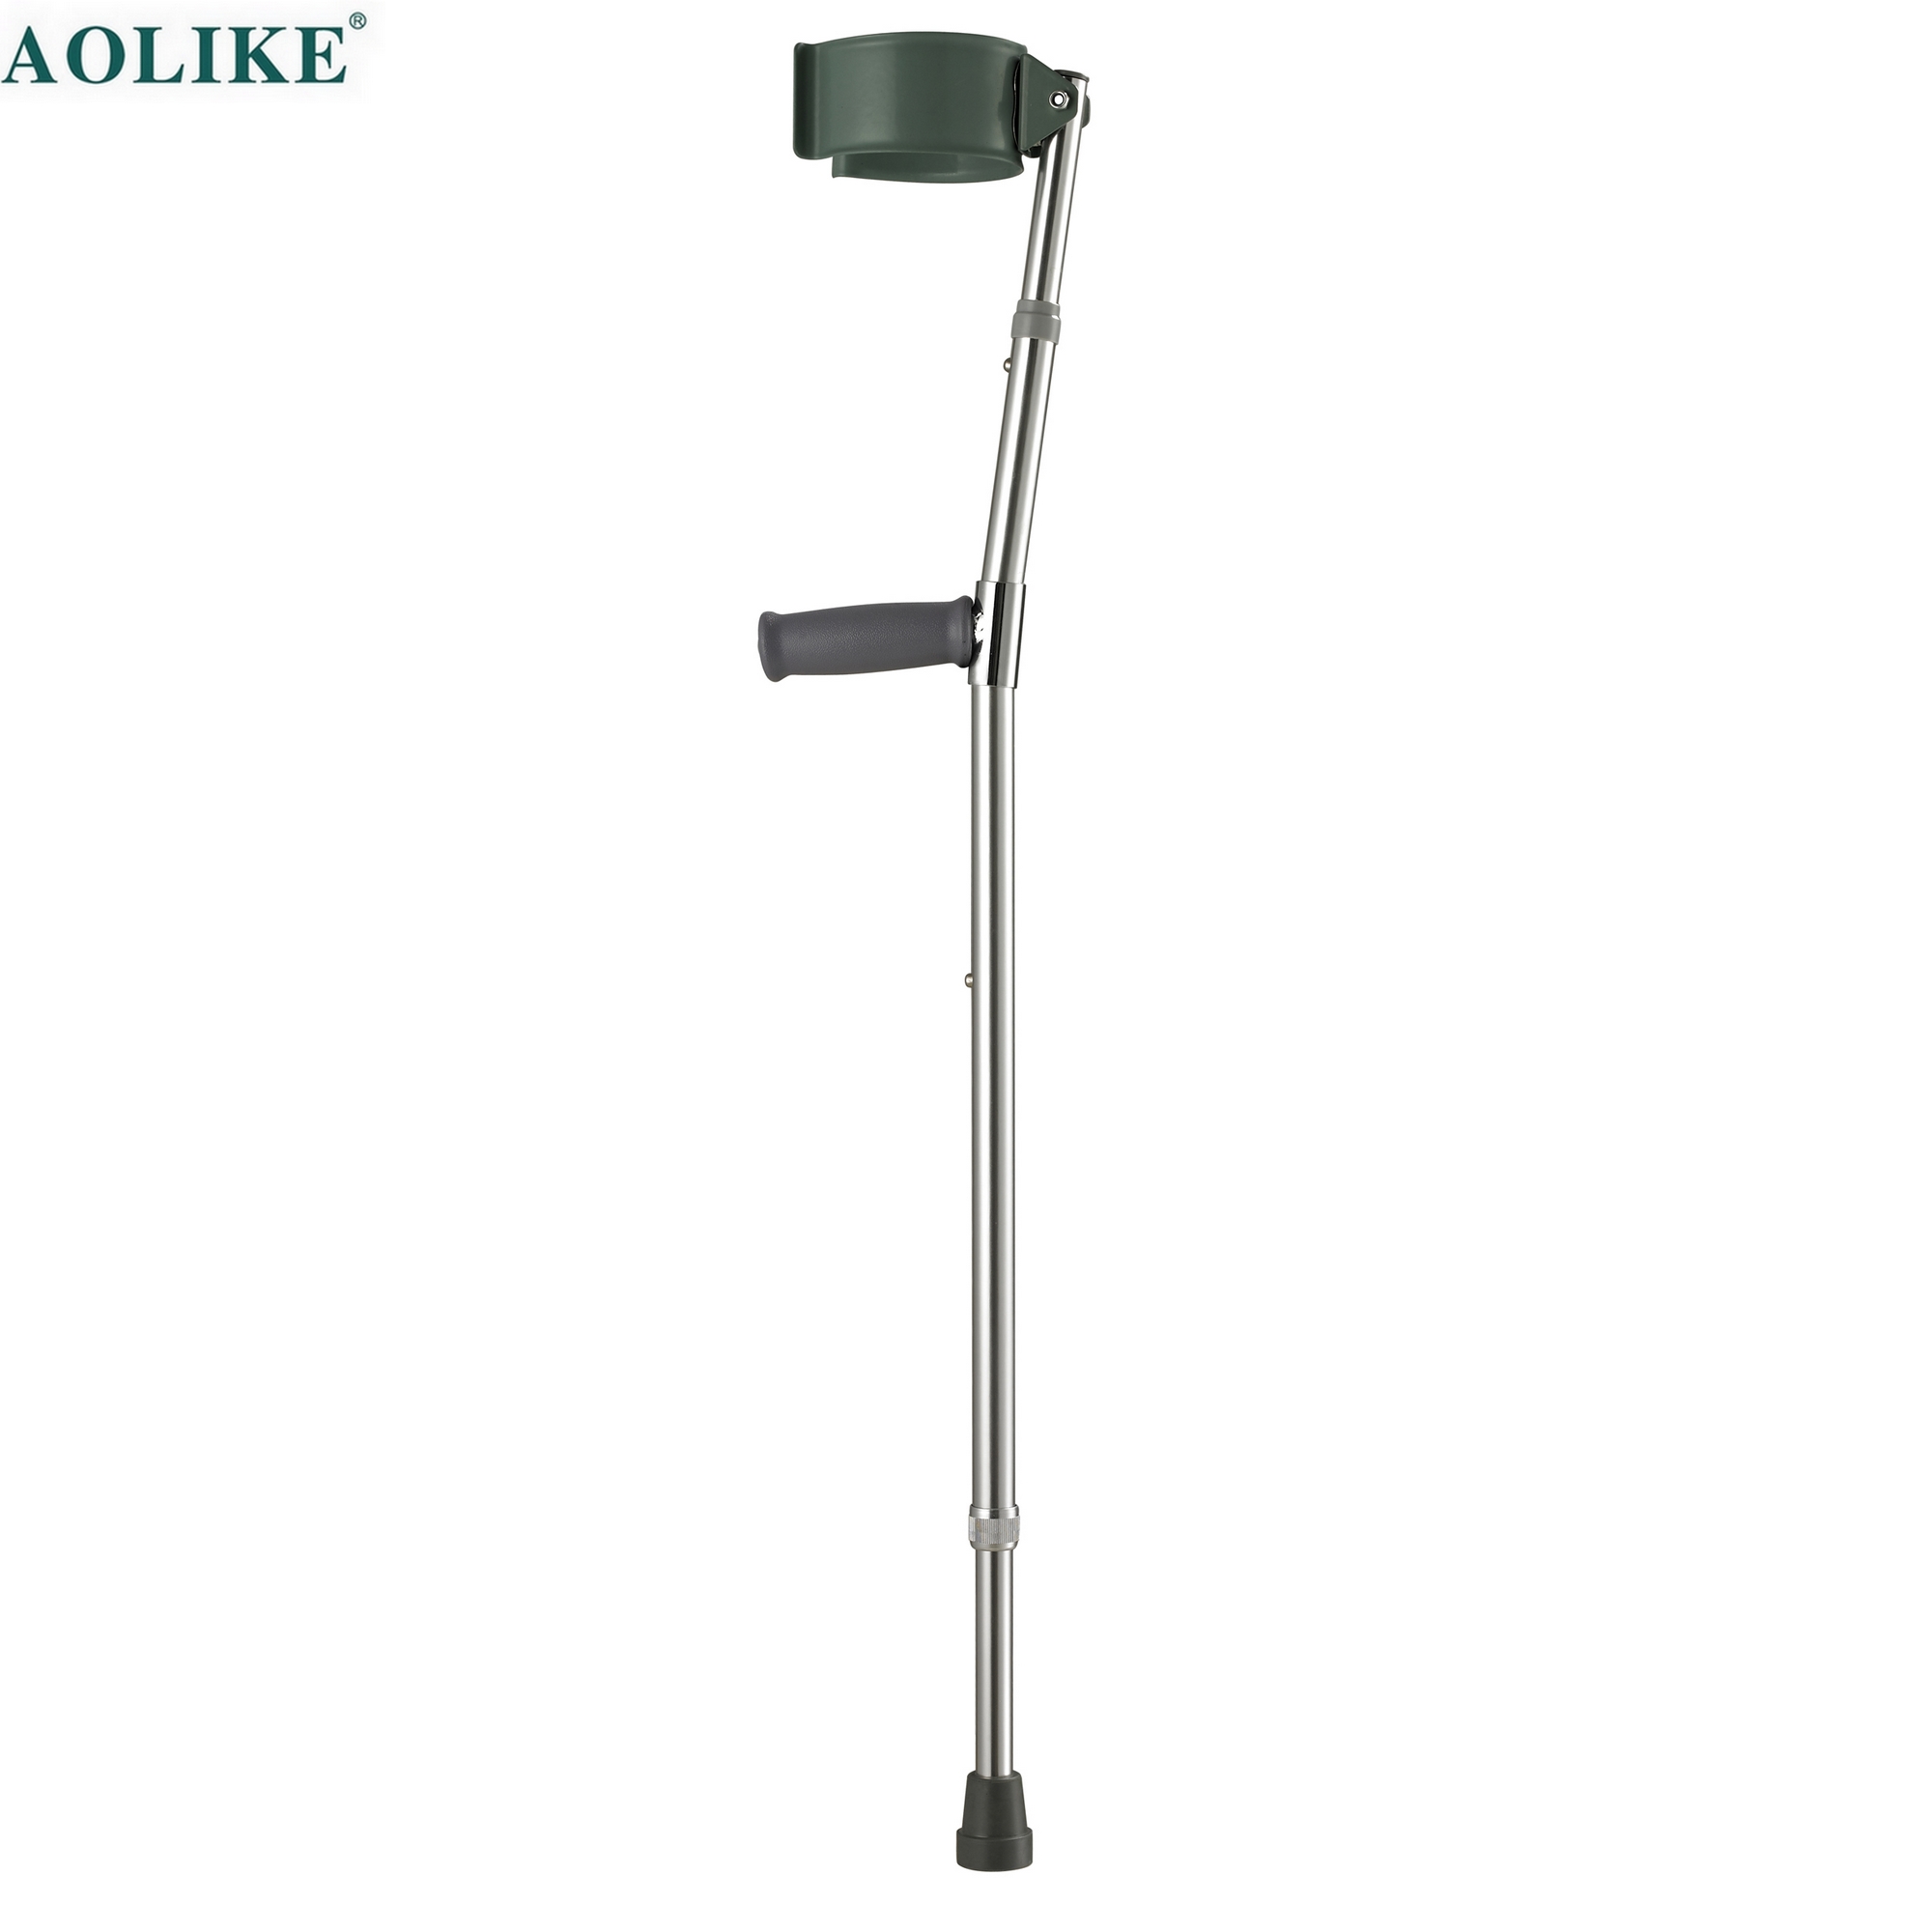 Elbow Walking Aids for Disabled ALK532L Free Spare Parts Class I 1 YEAR Adjustable Walking Stick 20pcs/box OEM Package One Size